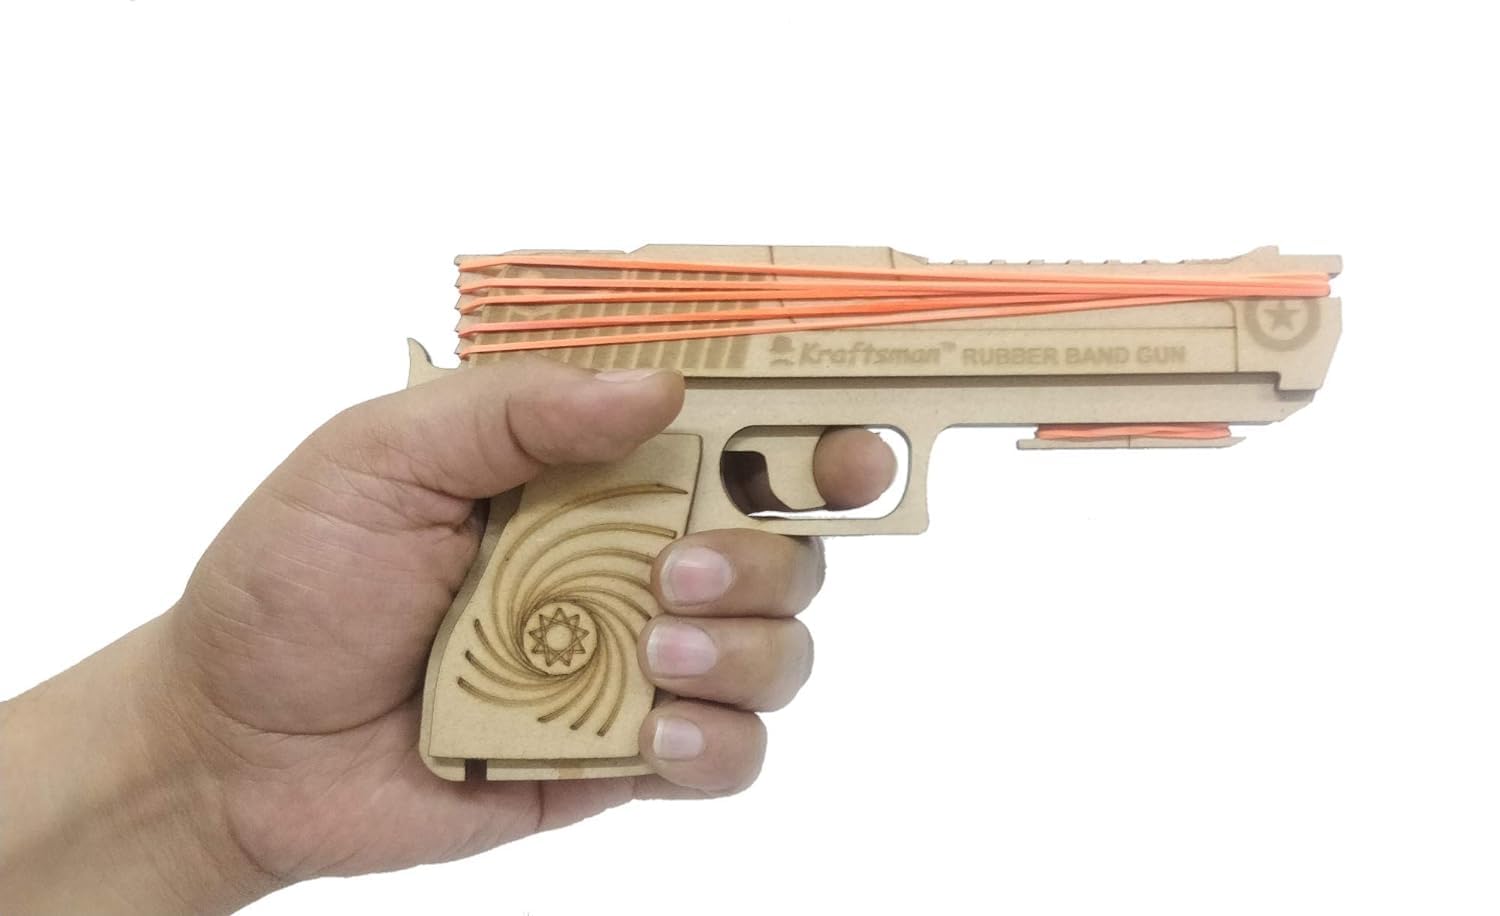 Braintastic Wooden Semi-Automatic Rubber Band Shooting Gun Toys with 5 Rapid Fire Shots for Kids (Beige)